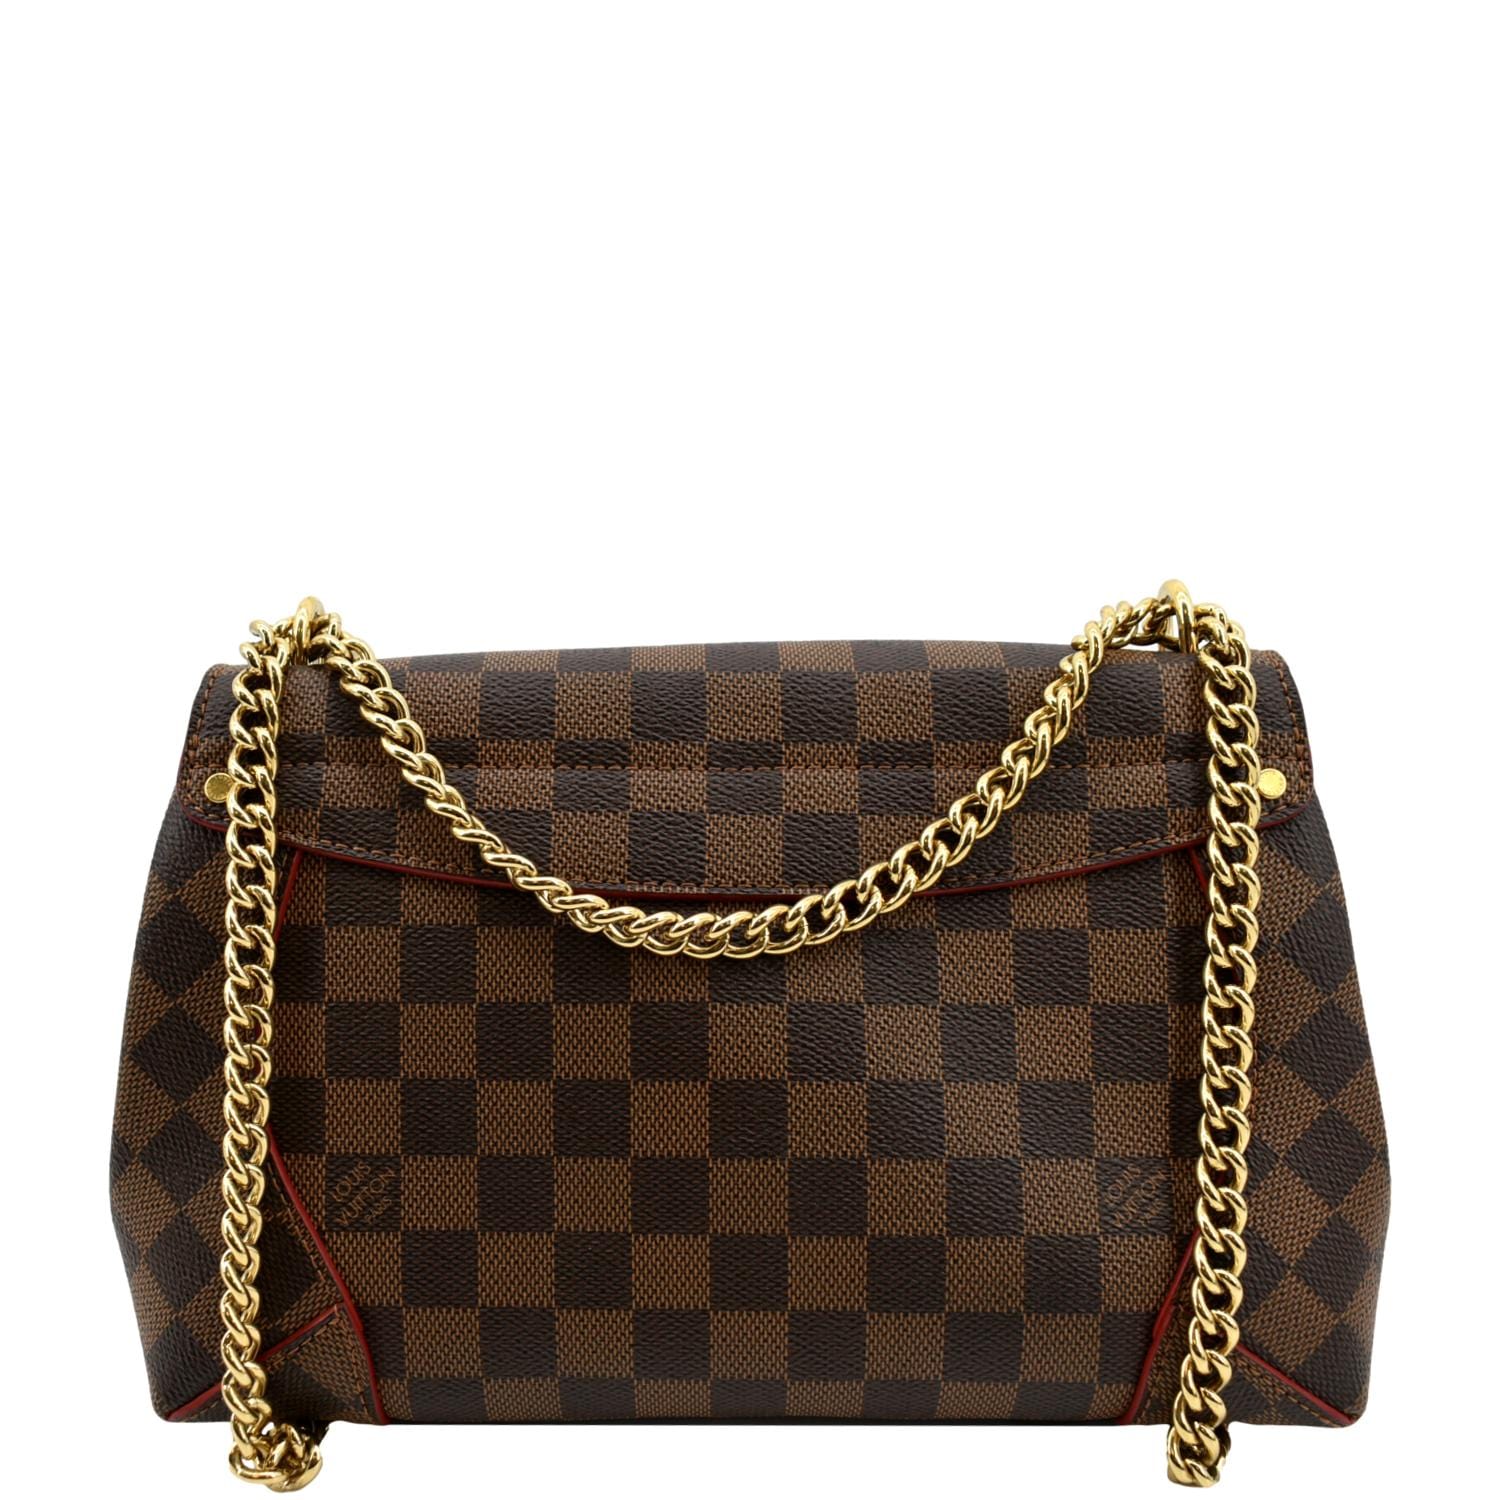 LOUIS VUITTON CAISSA Clutch, What is IN my PURSE, Brief Review